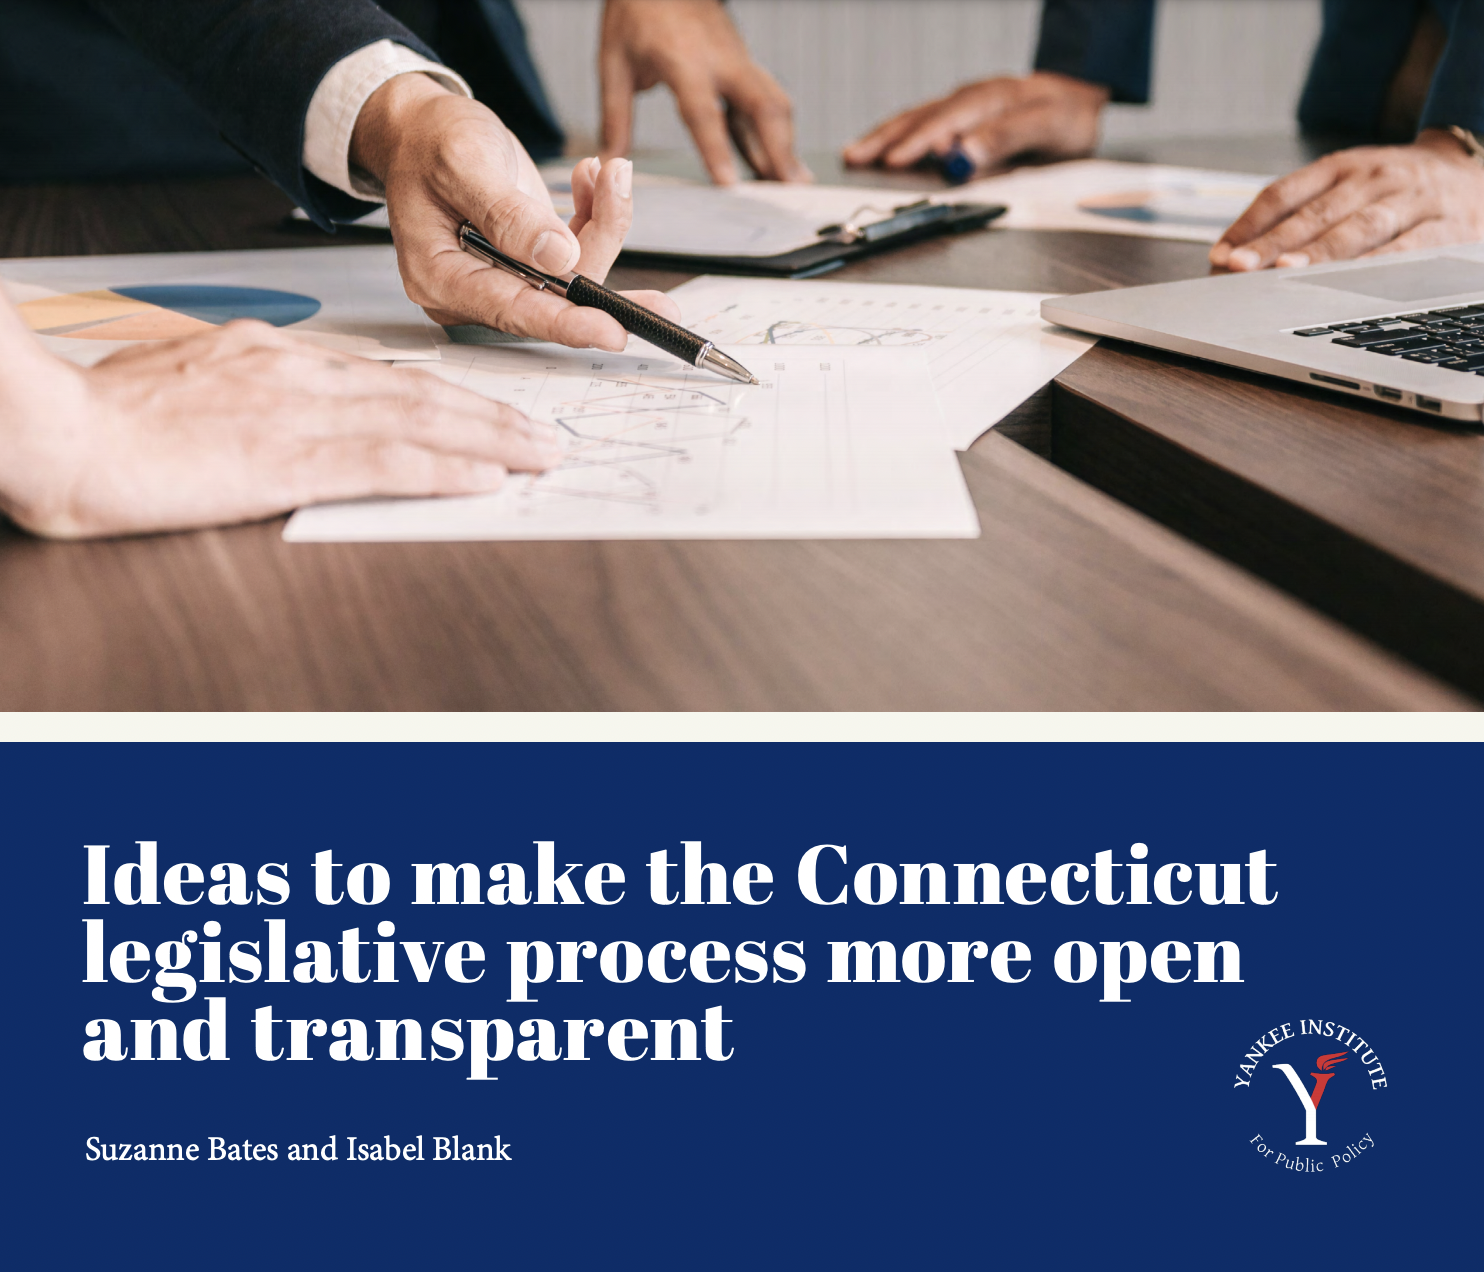 Ideas to make the Connecticut legislative process more open and transparent